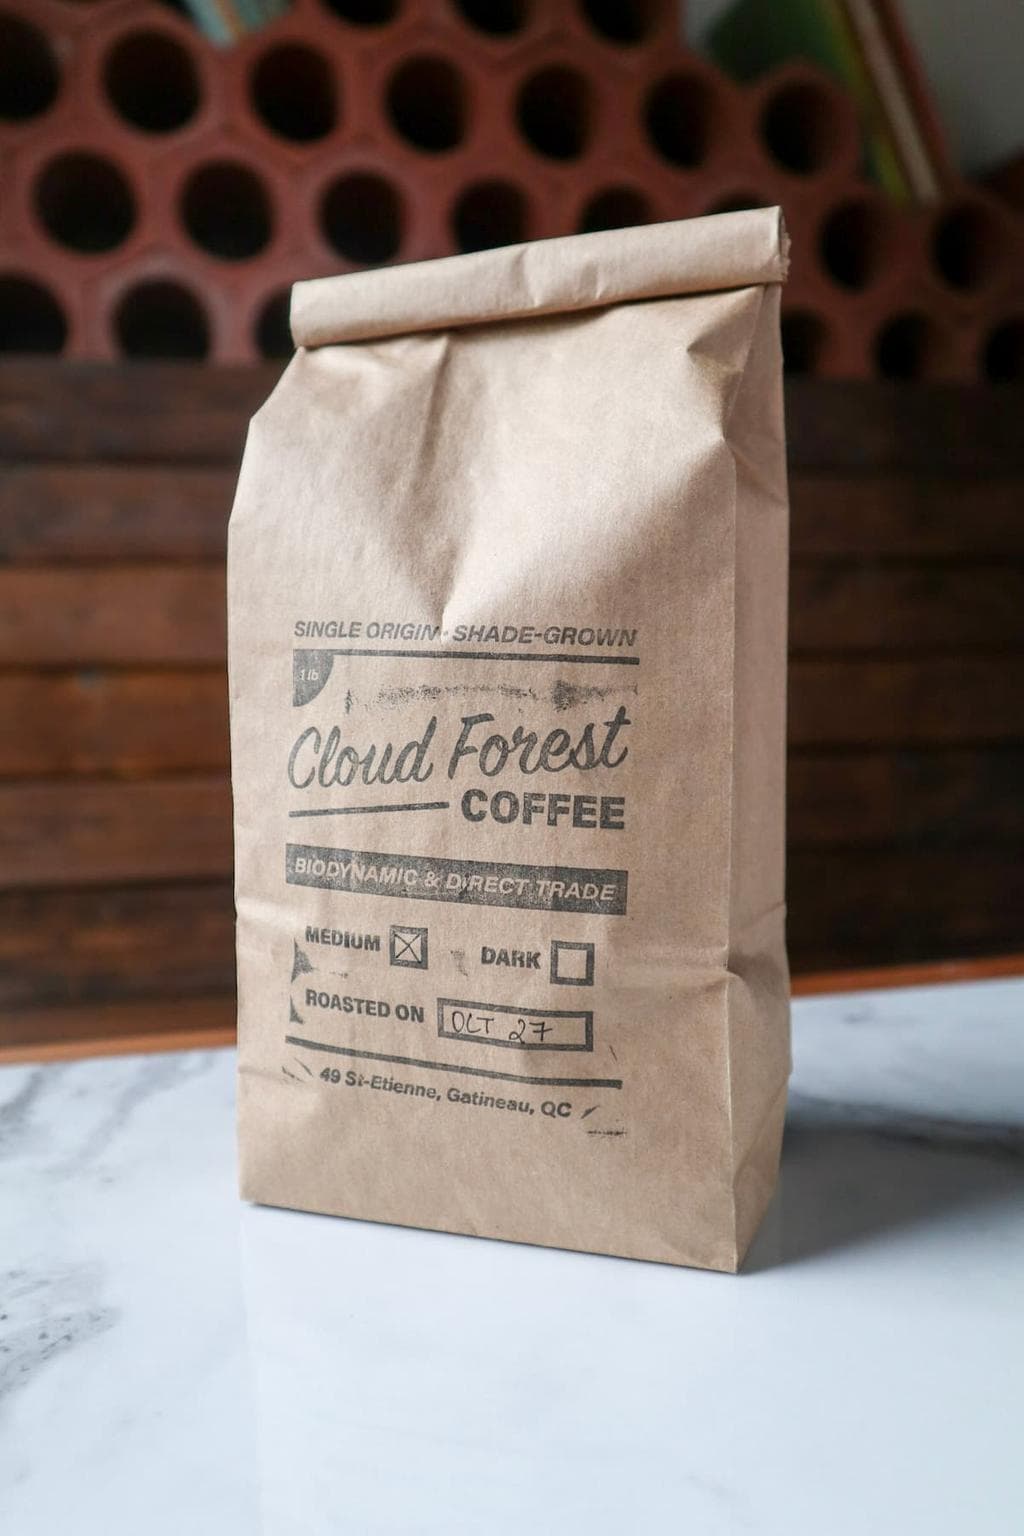 A product shot of a bag of Cloud Forest Coffee.